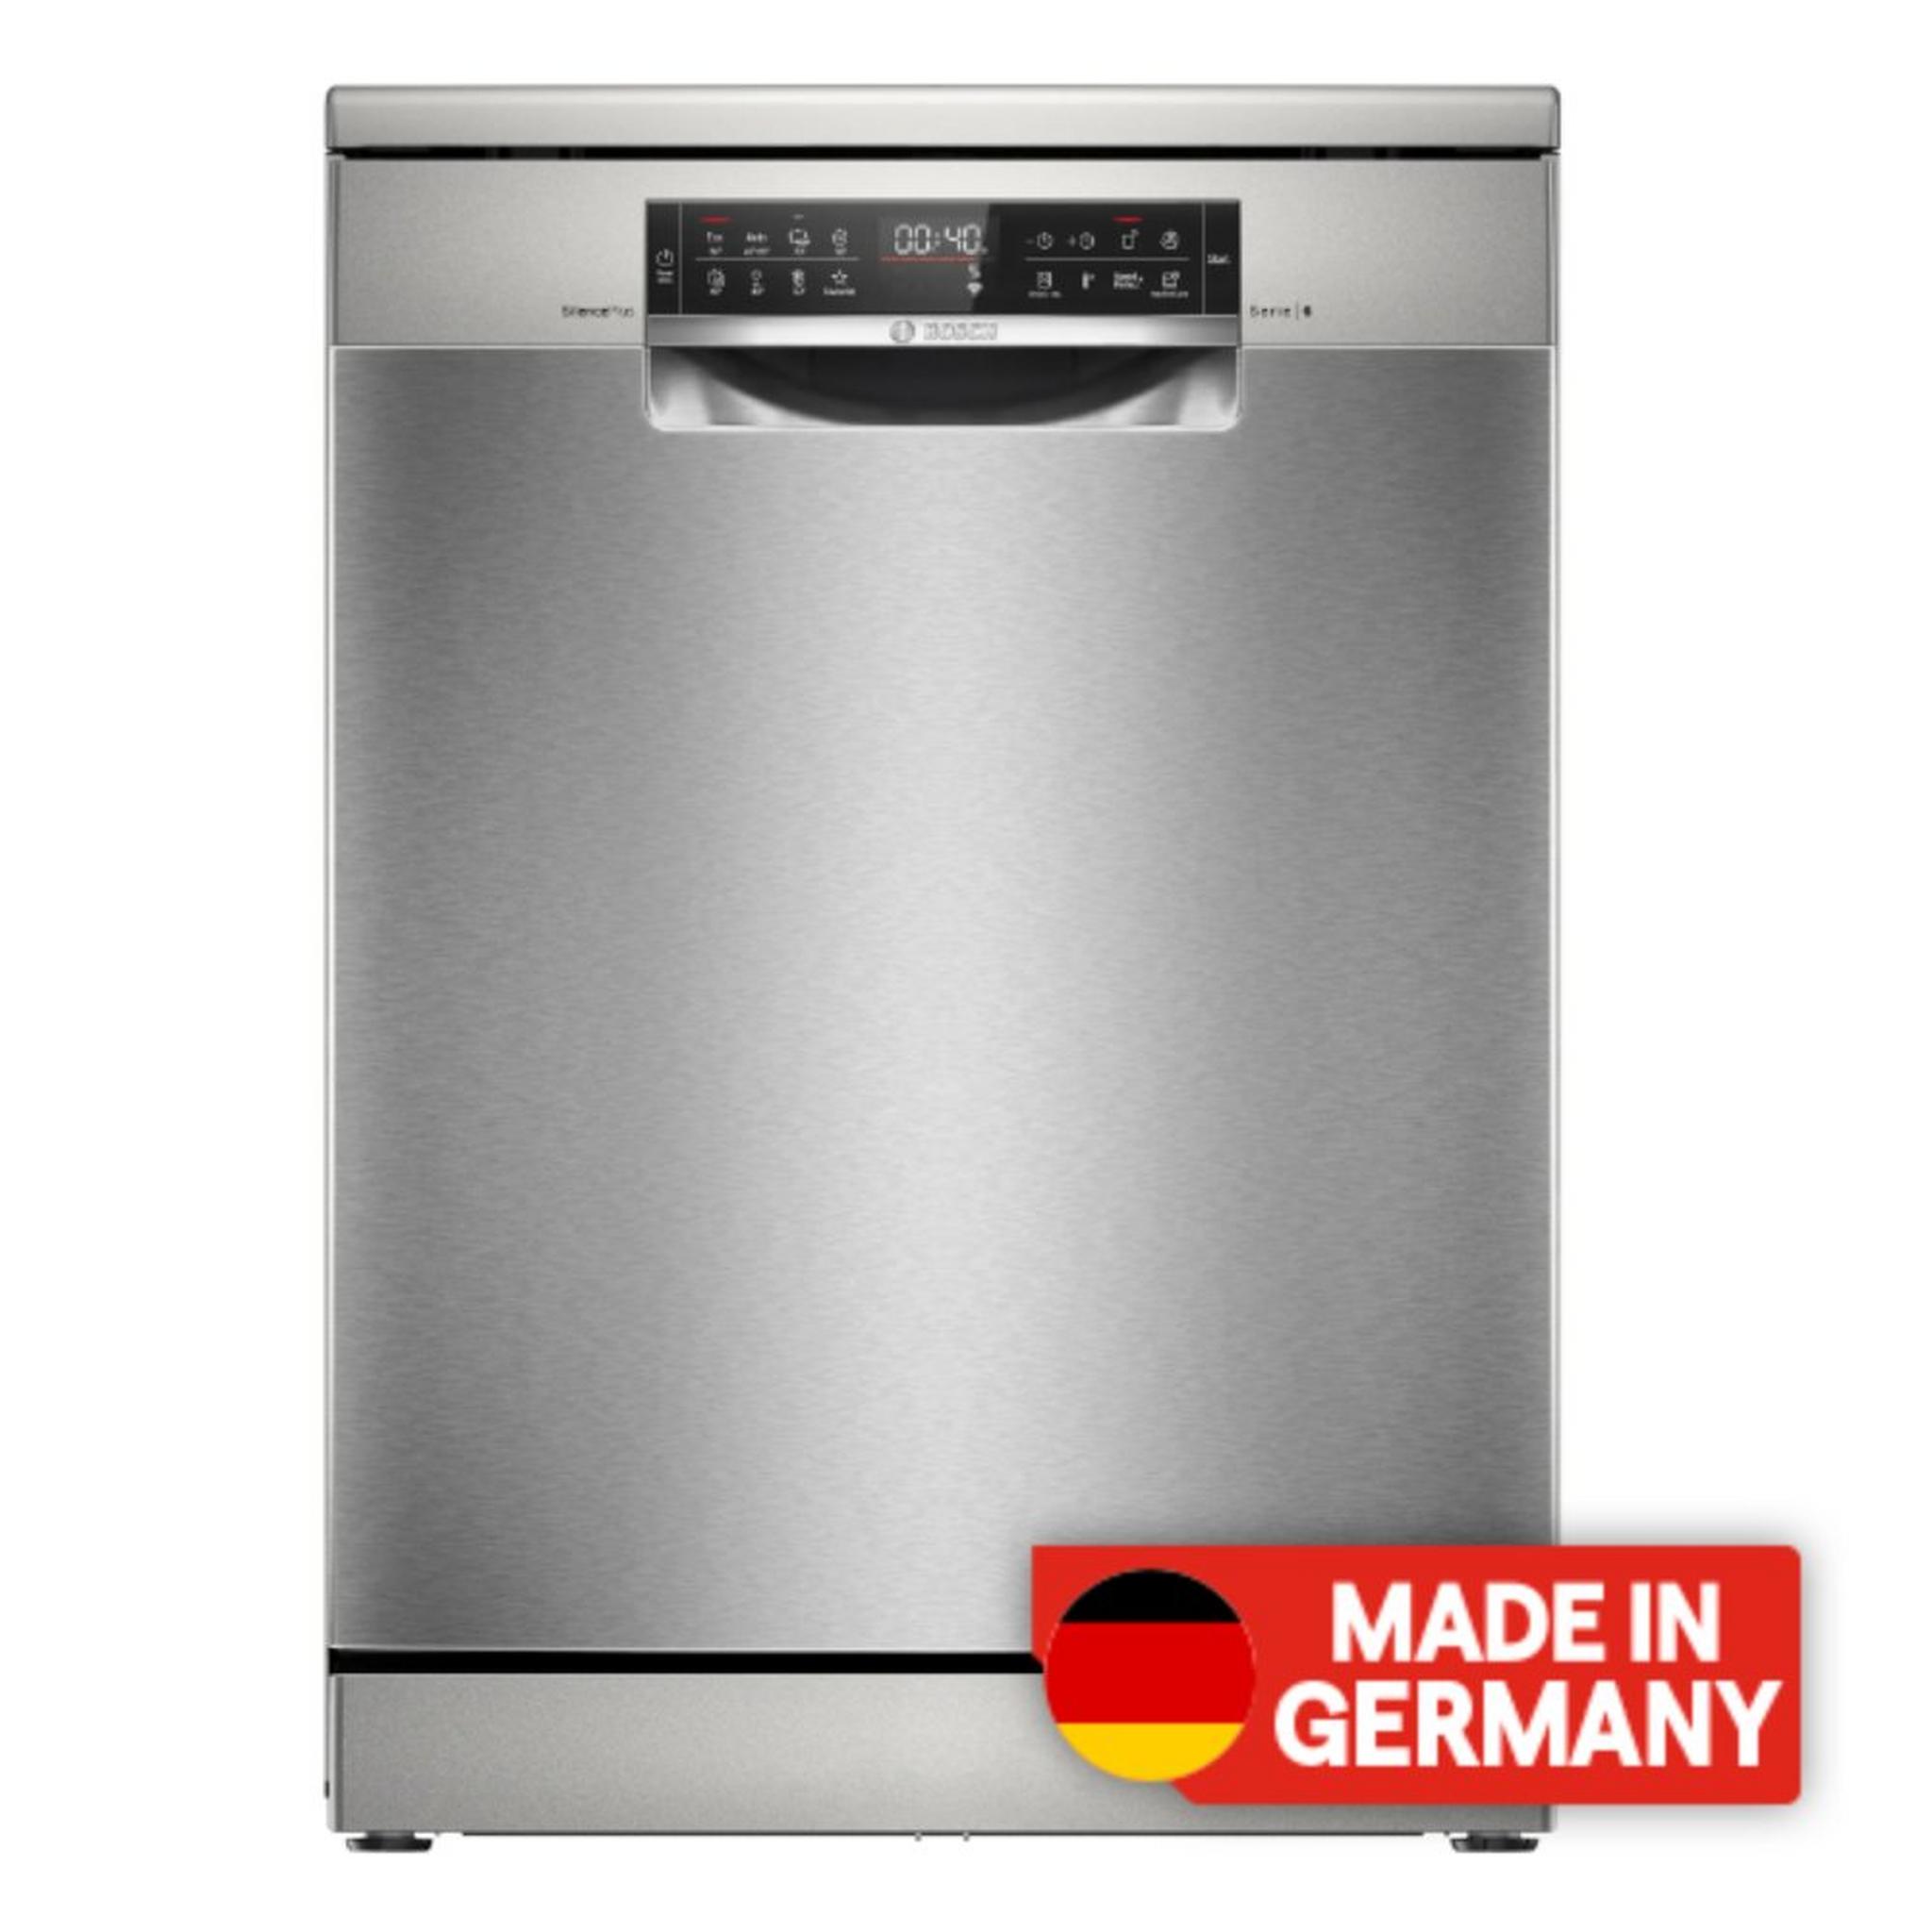 BOSCH Series 6 Free-Standing Dishwasher, 8 Programs, 13 Place Settings, SMS6ECI38M - Silver Inox